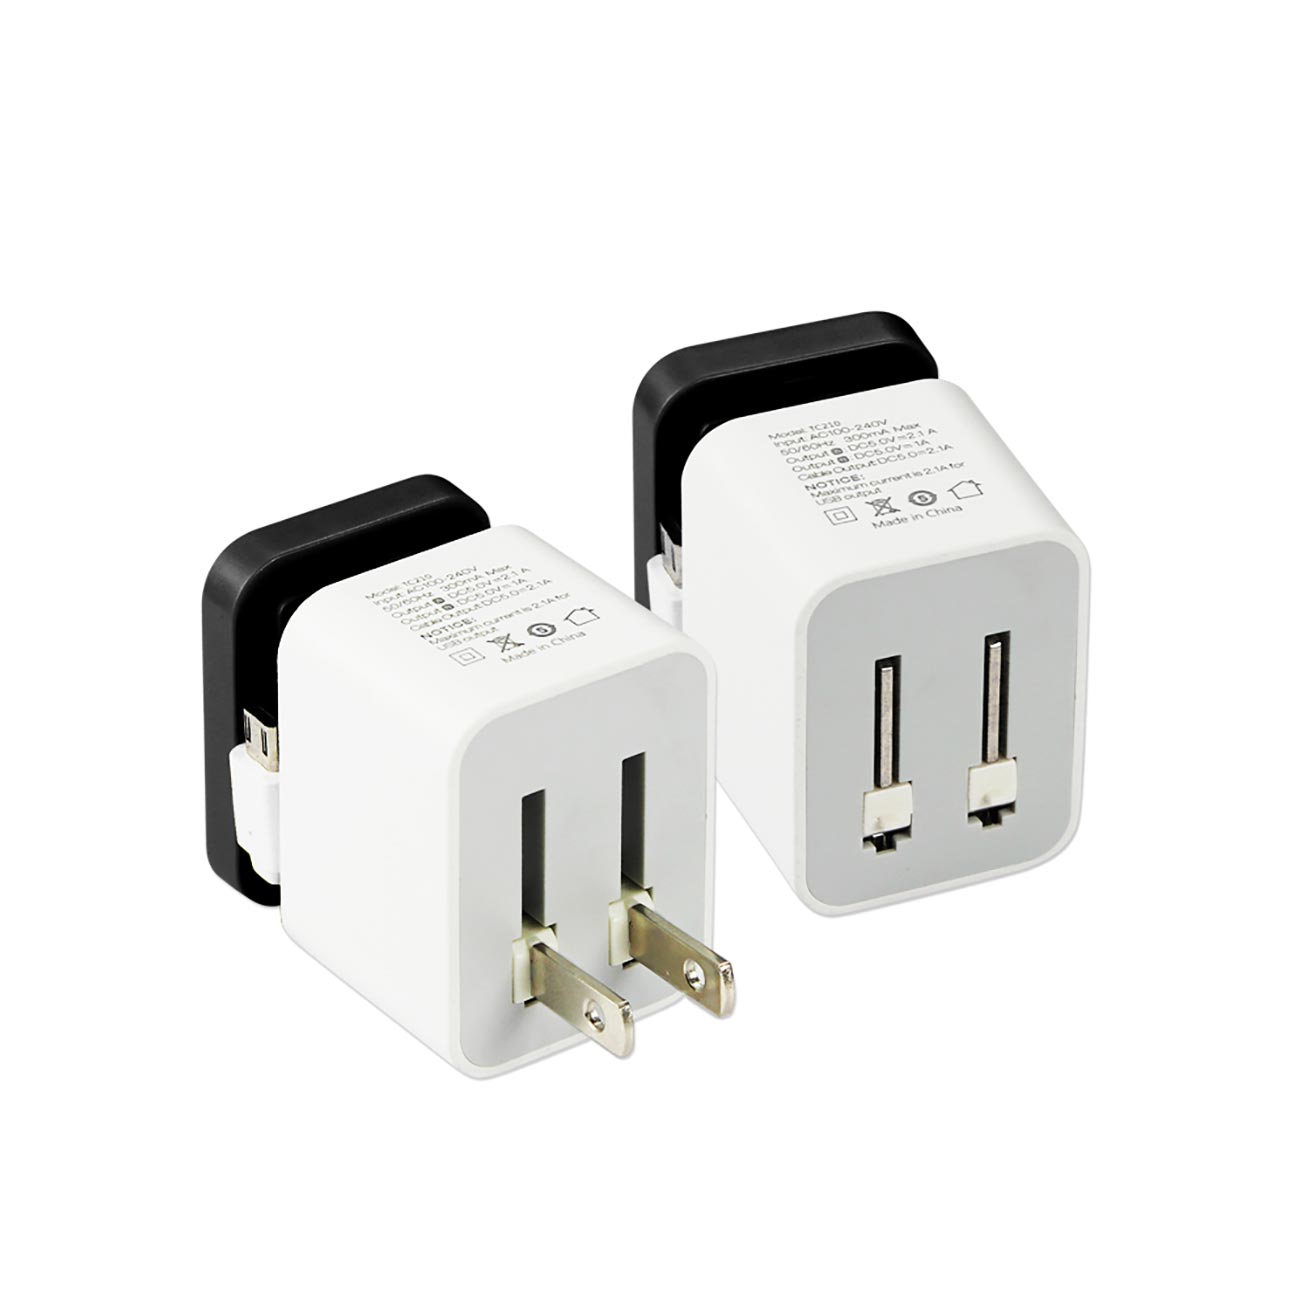 2 AMP Dual Port Portable Travel Adapter Charger In Black